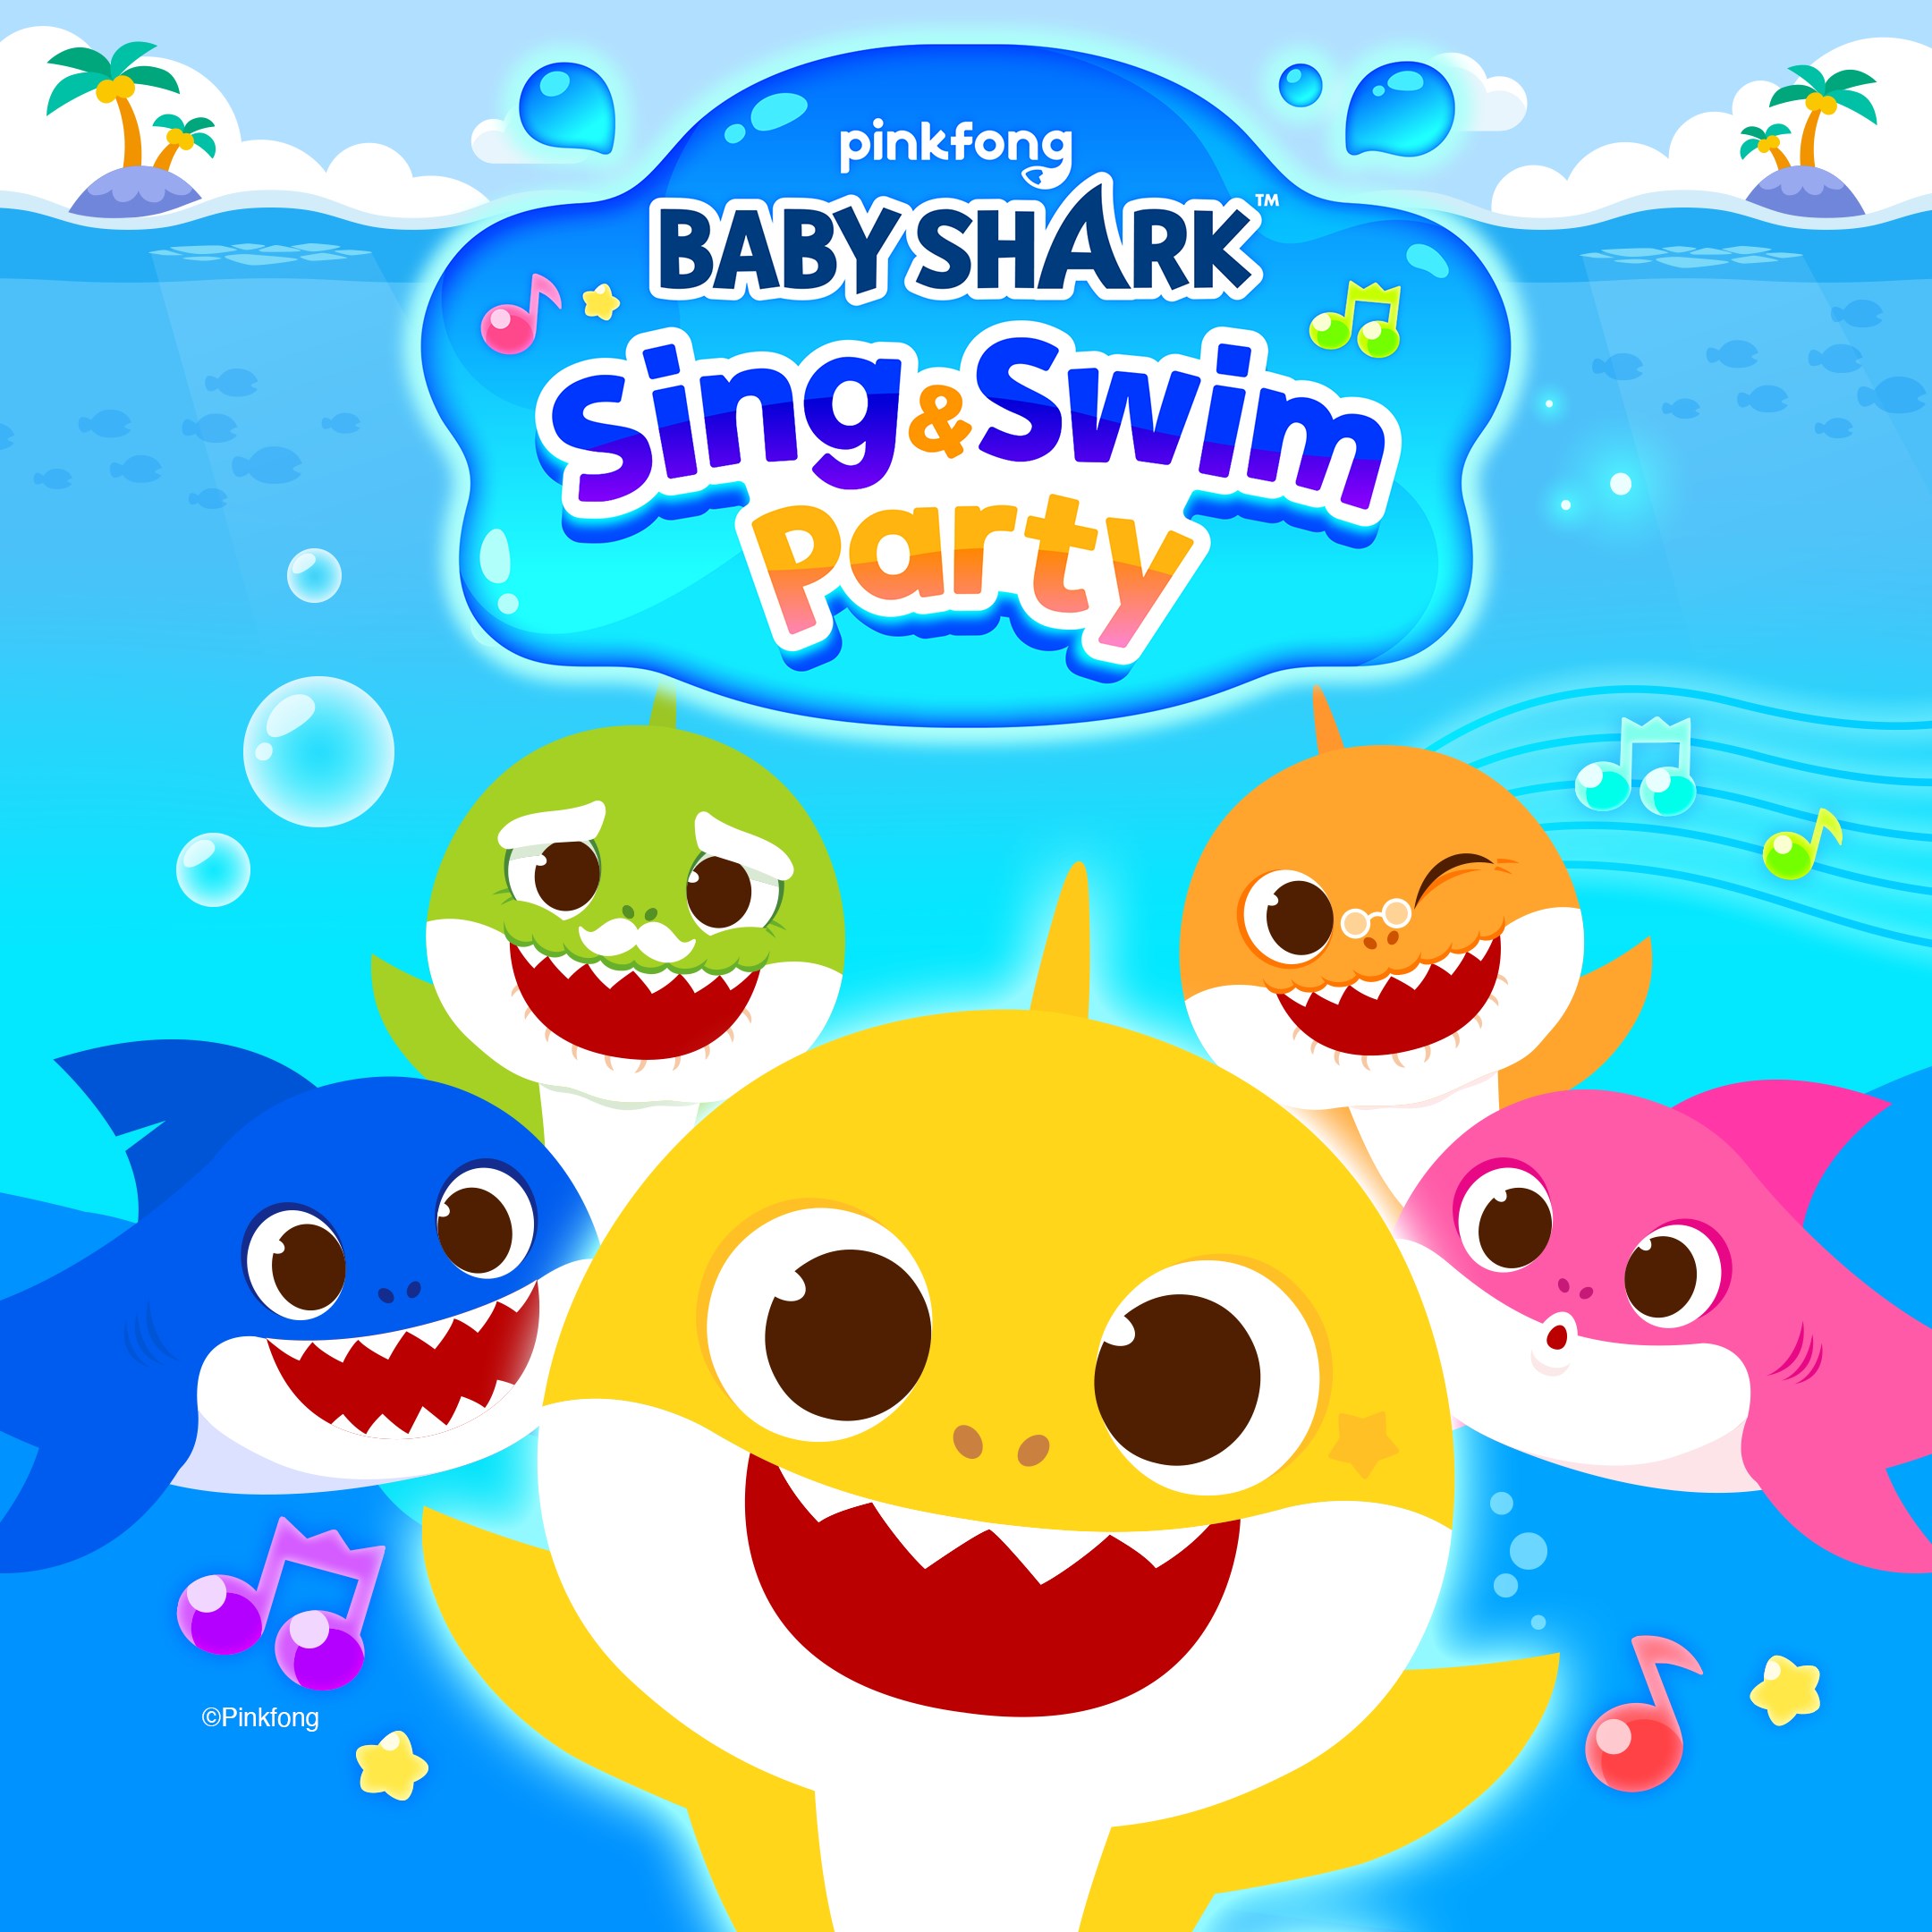 Baby Shark™: on chante et on nage